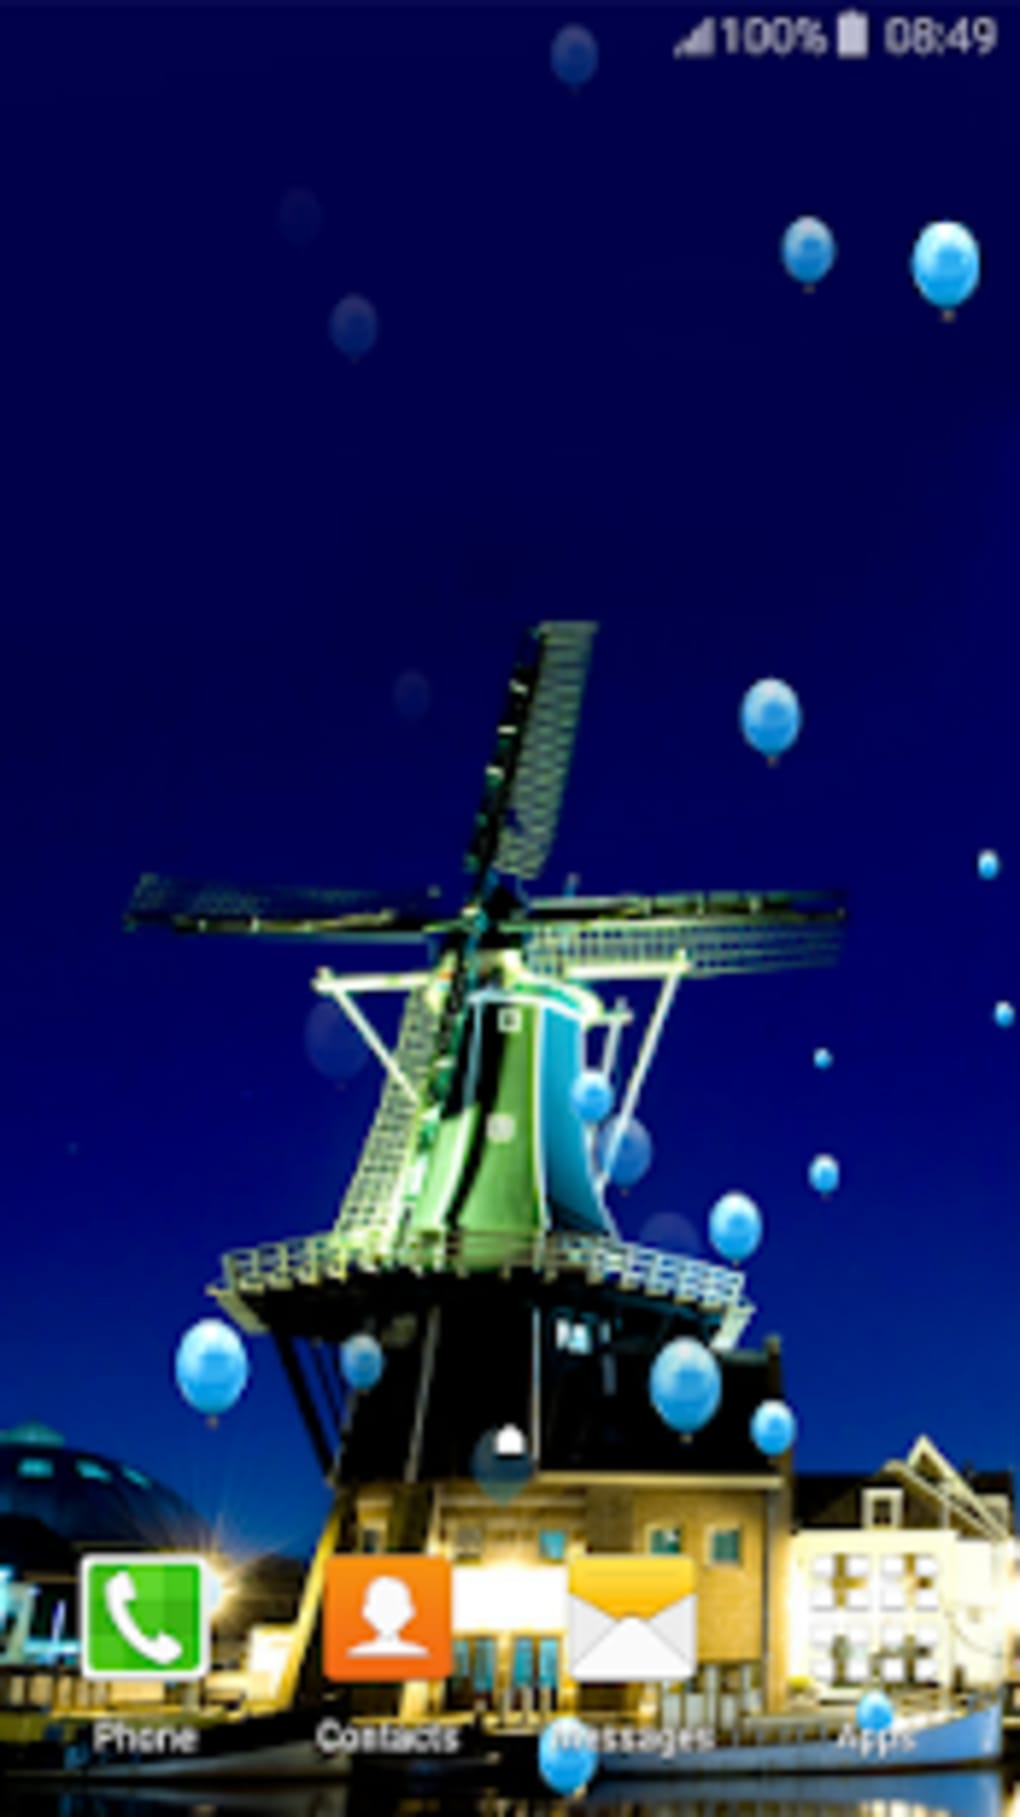 Windmill Live Wallpapers APK for Android - Download